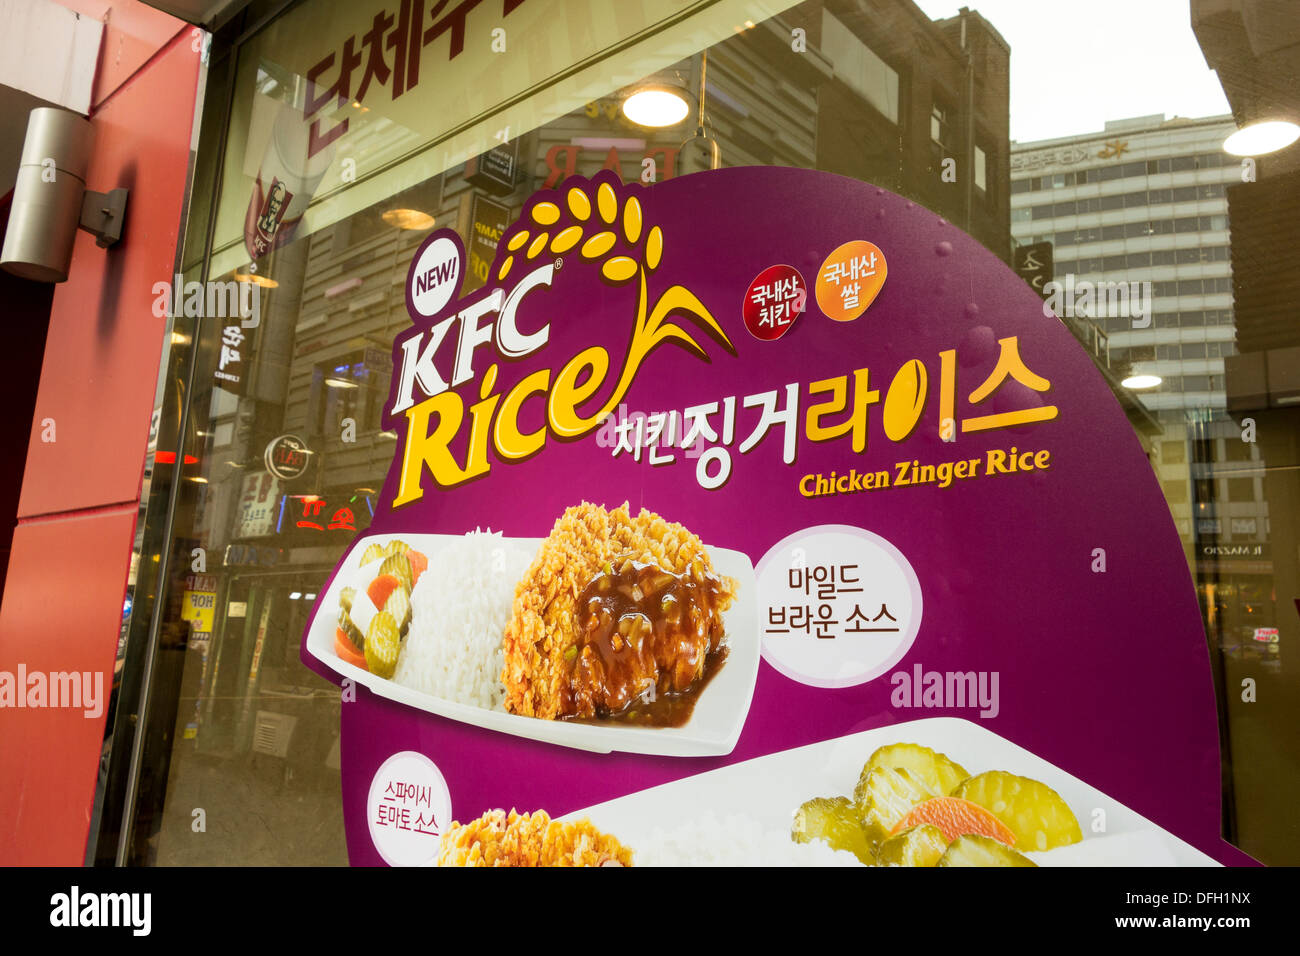 KFC in Seoul promoting Chicken Zinger Rice menu on window.  For Koreans, rice is main staple food. Stock Photo